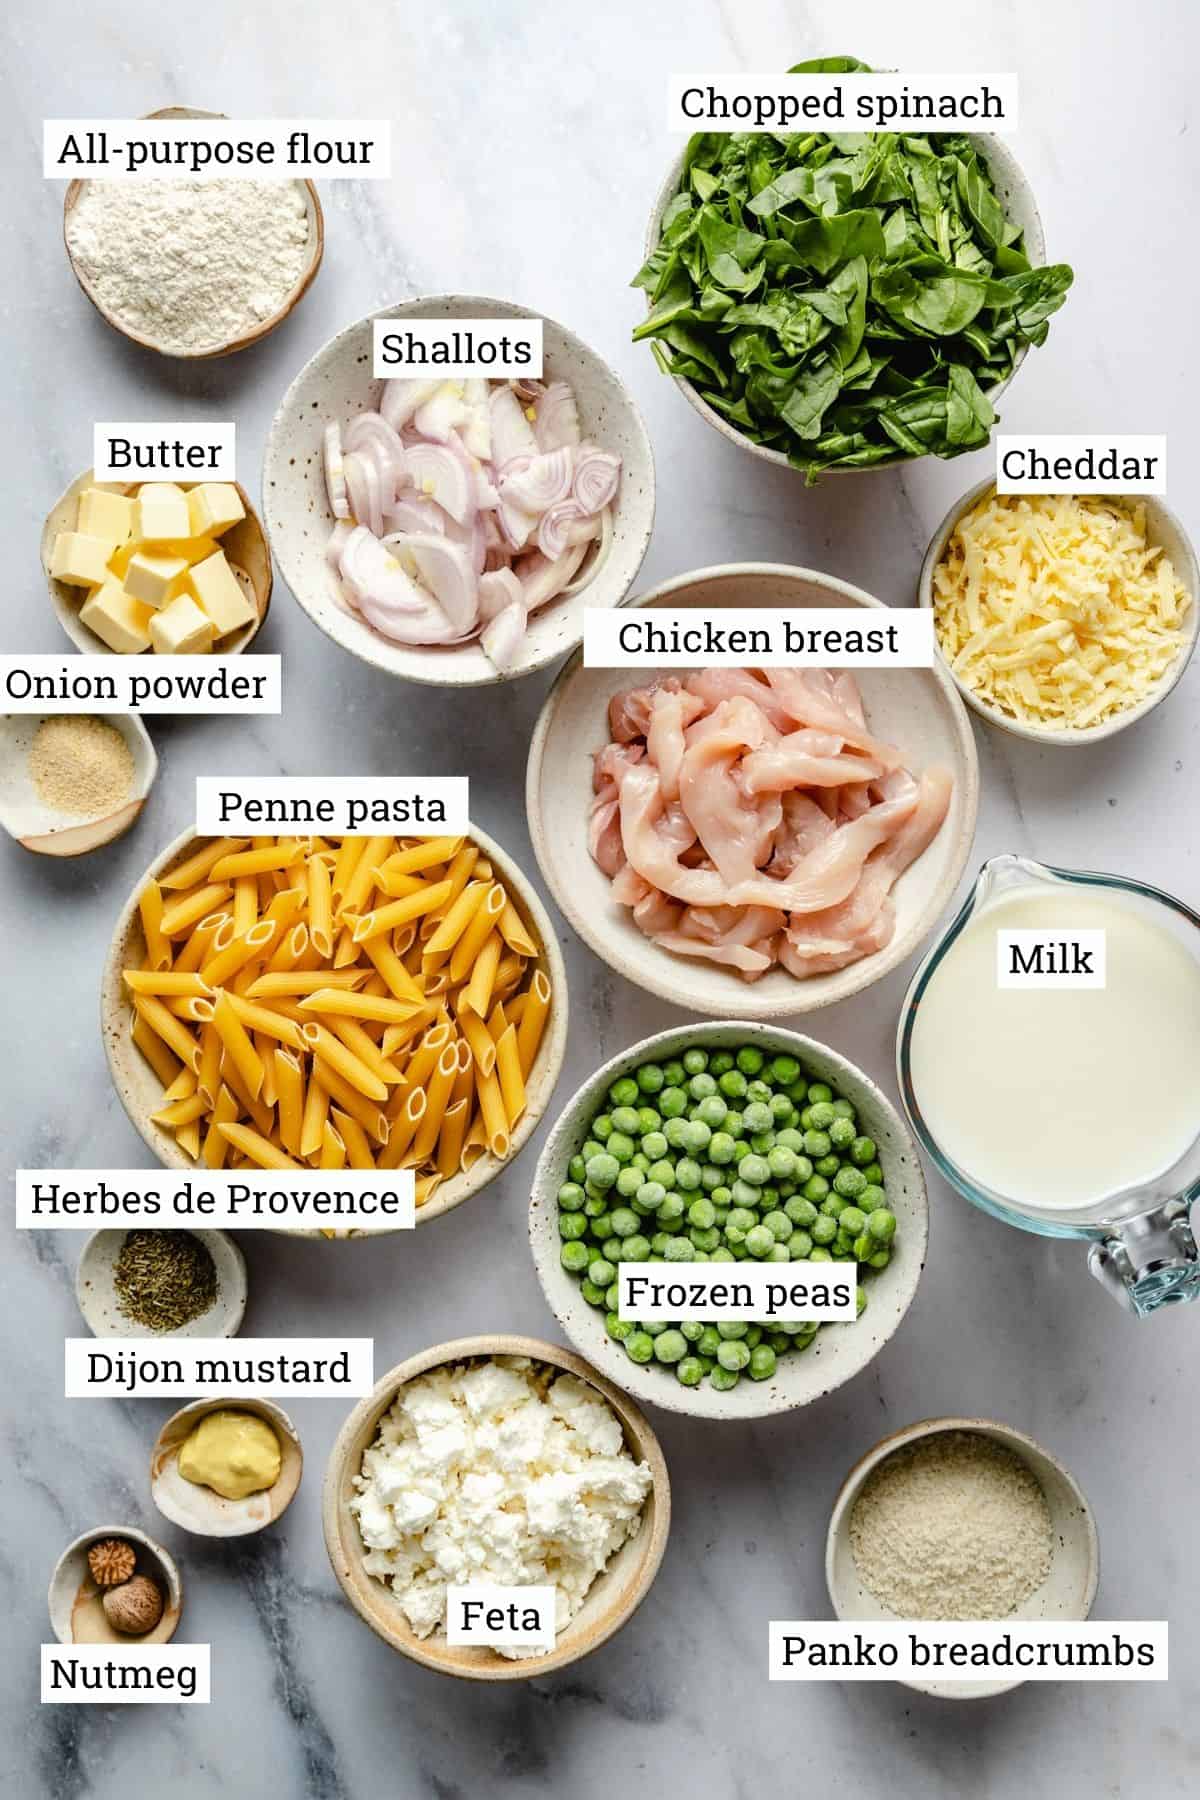 Ingredients in bowls with labels on a marble background.